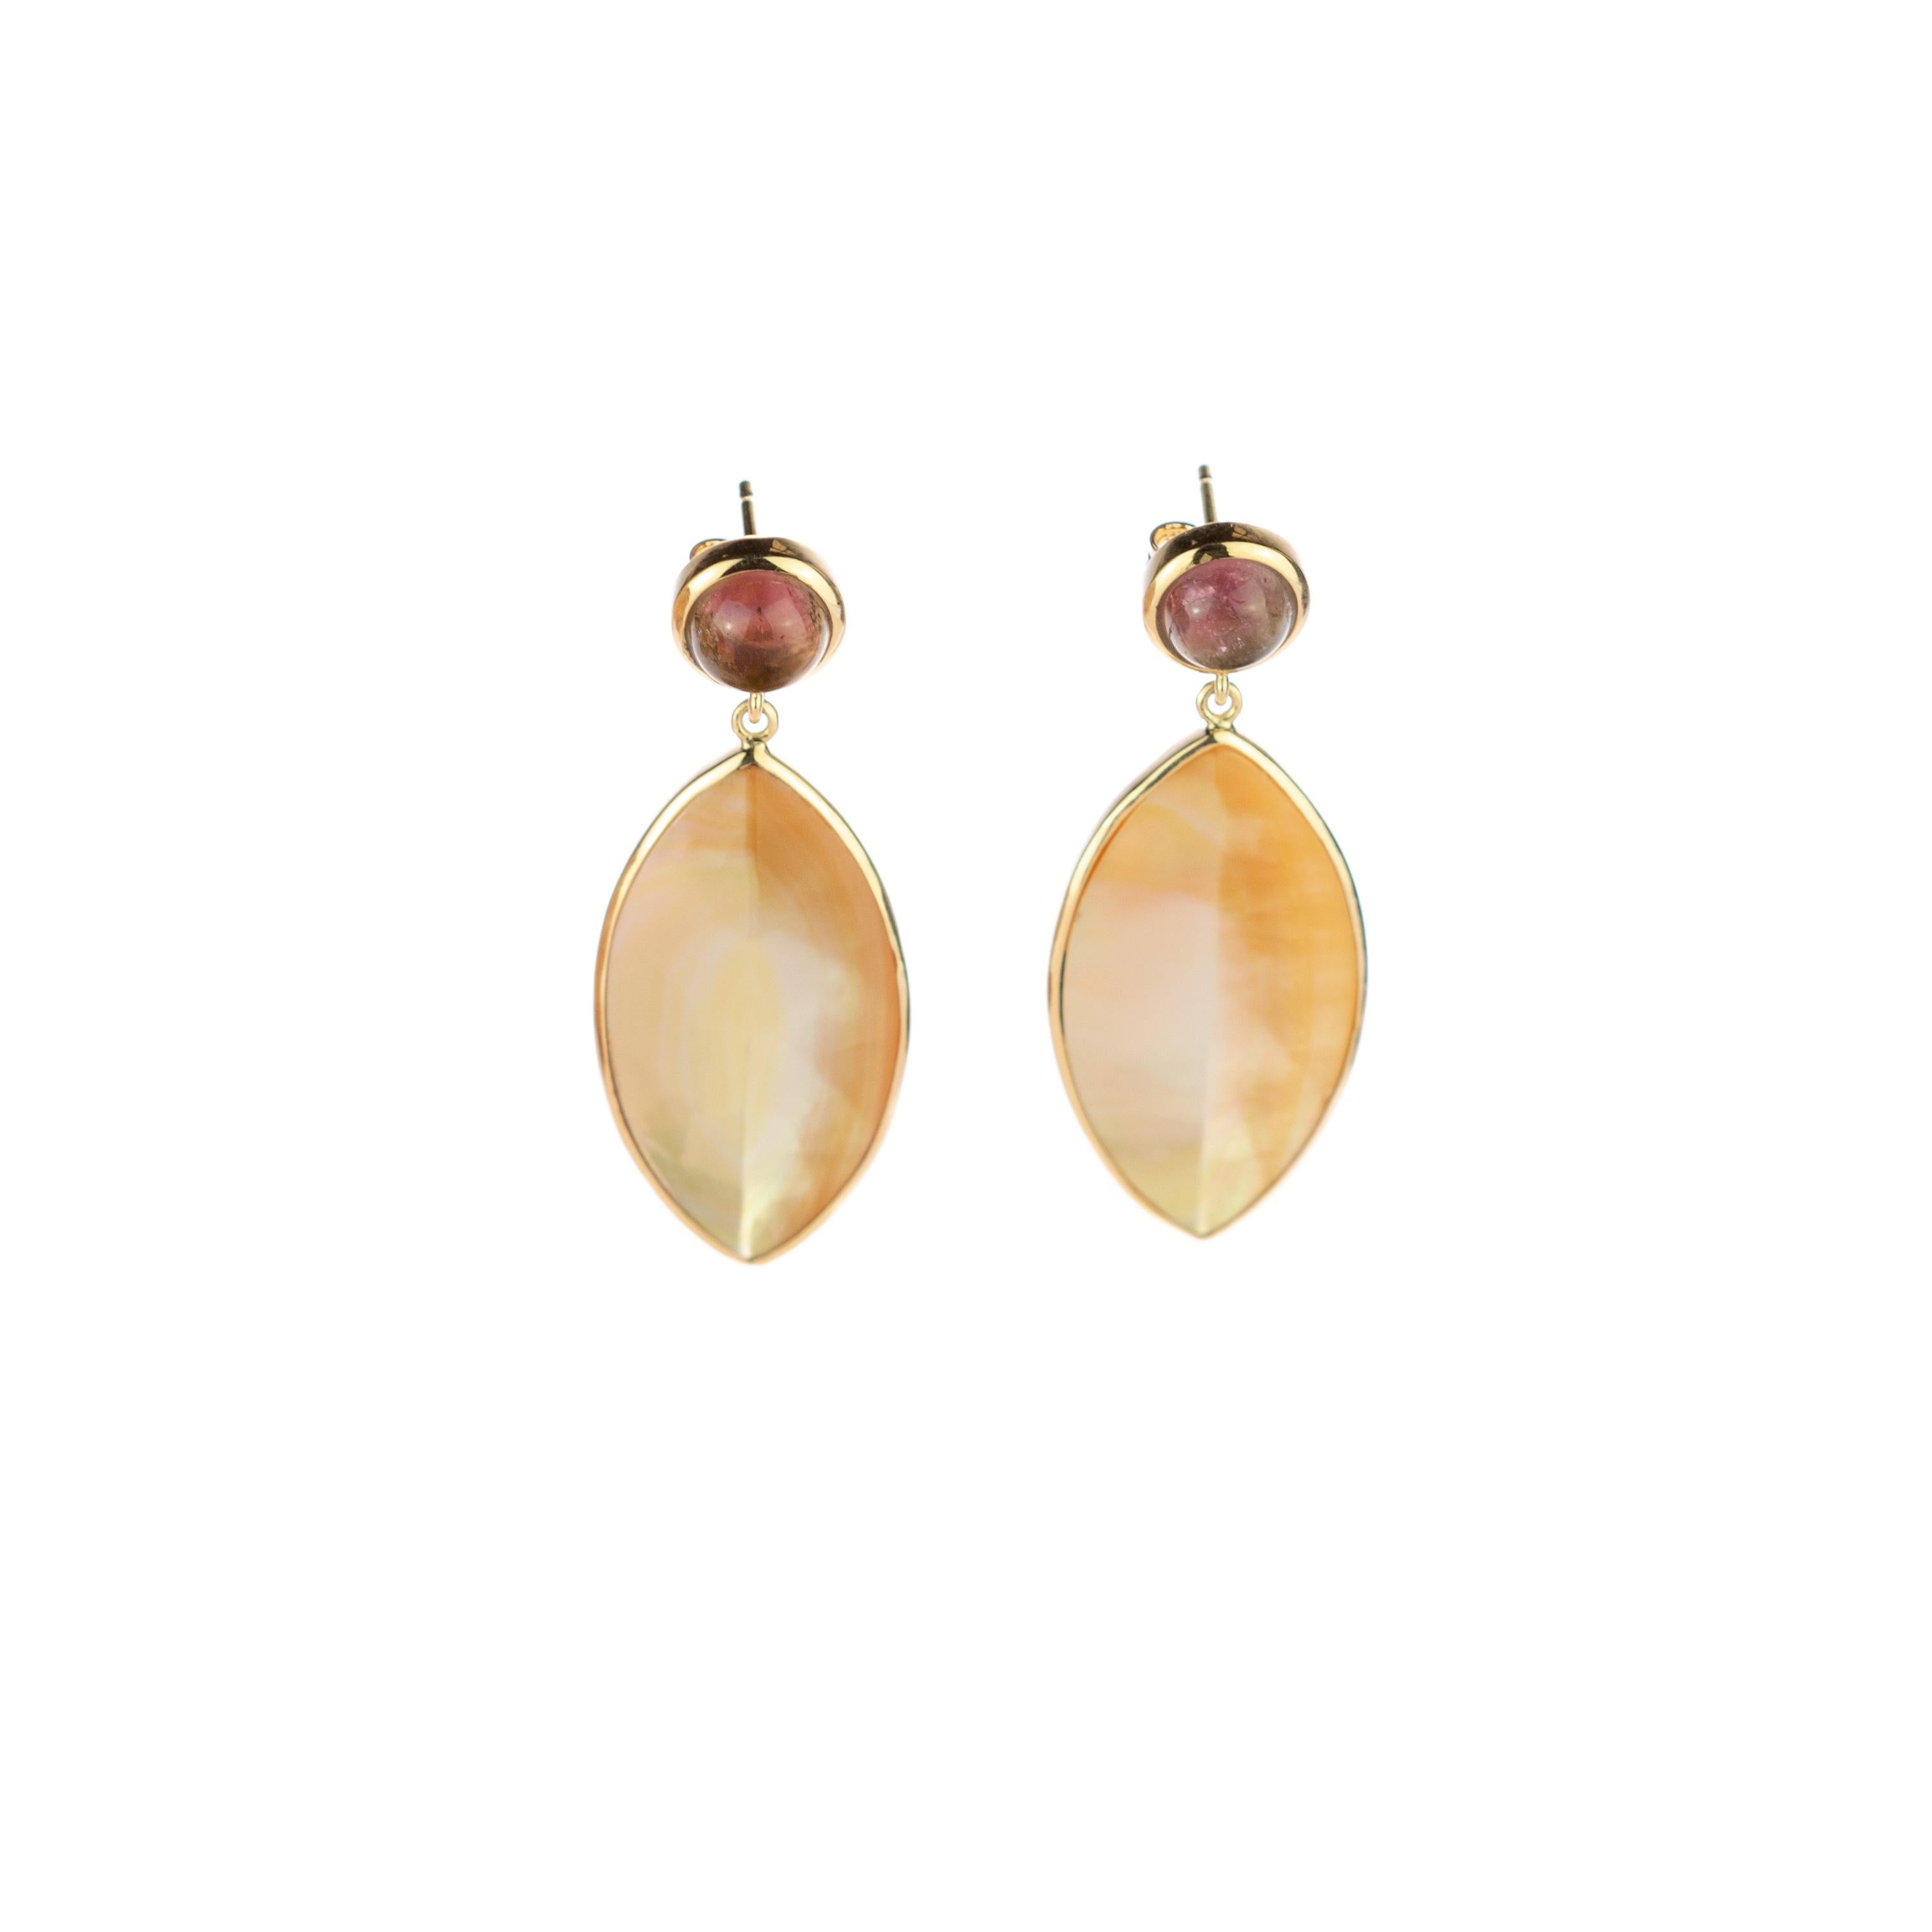 Rare and magnificent 25 carats Mother of Pearl leaves earrings surrounded with 18 karat yellow gold embellished each in a leaf shape perfect for a stunning night! The round 5 carats tourmaline cabochon recreates a vintage look with a comfortable